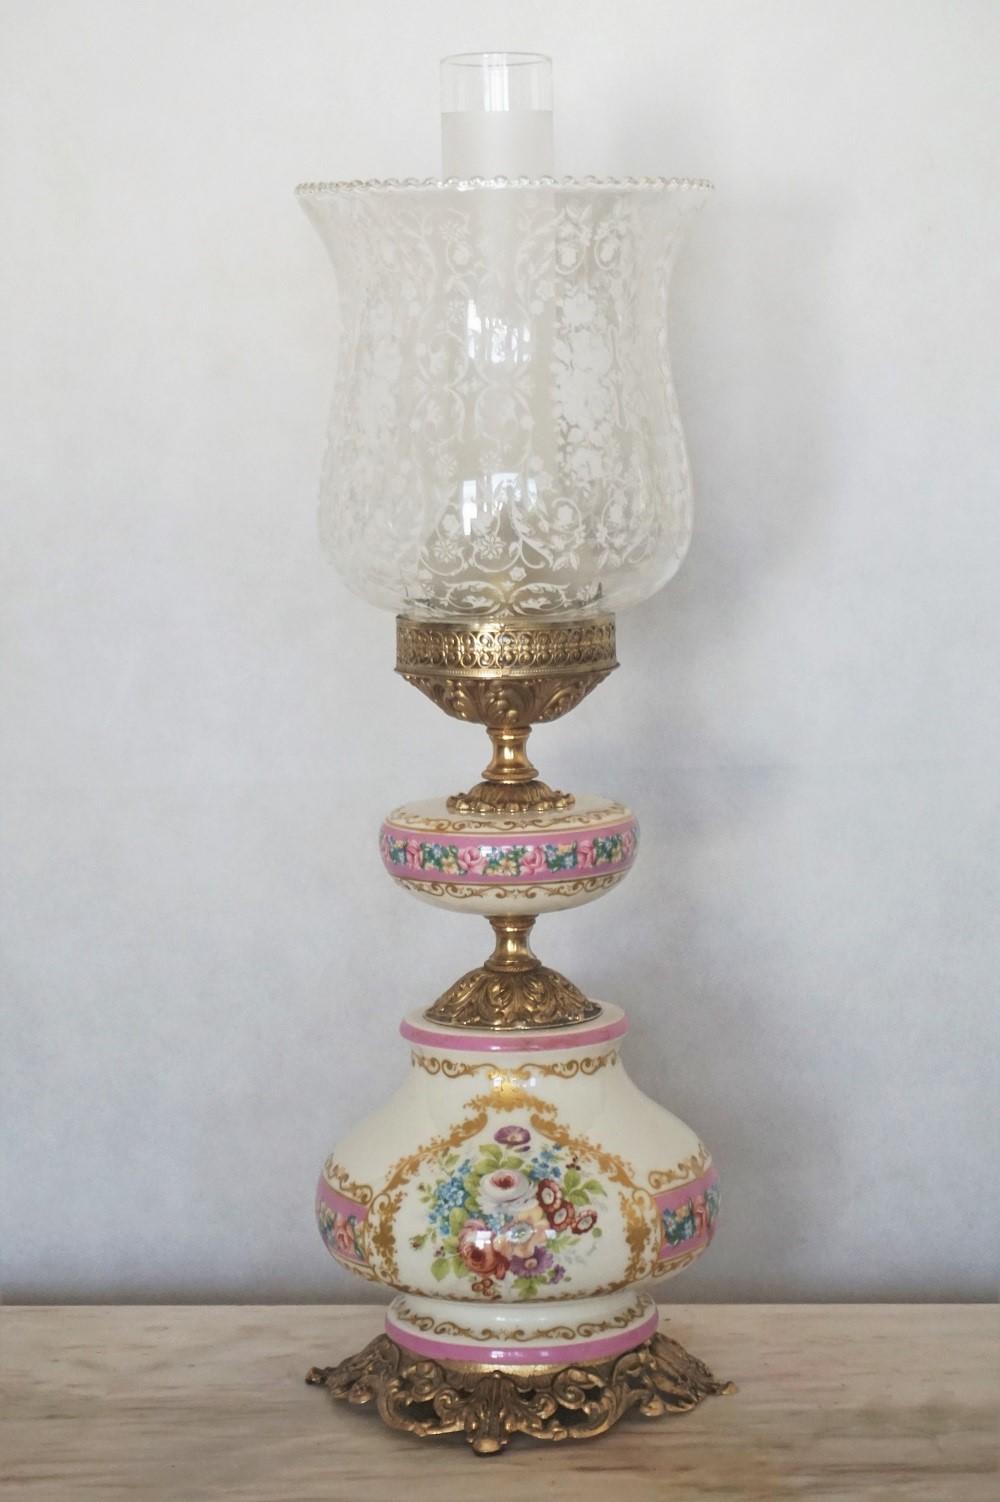 A beautiful pair of large Vintage white and rose color porcelain table lamps hand painted with elegant floral motifs and gilded decoration, gilt brass mounts, France Paris, circa 1940-1950. Etched Glass lamp shades with art motifs, frosted glass